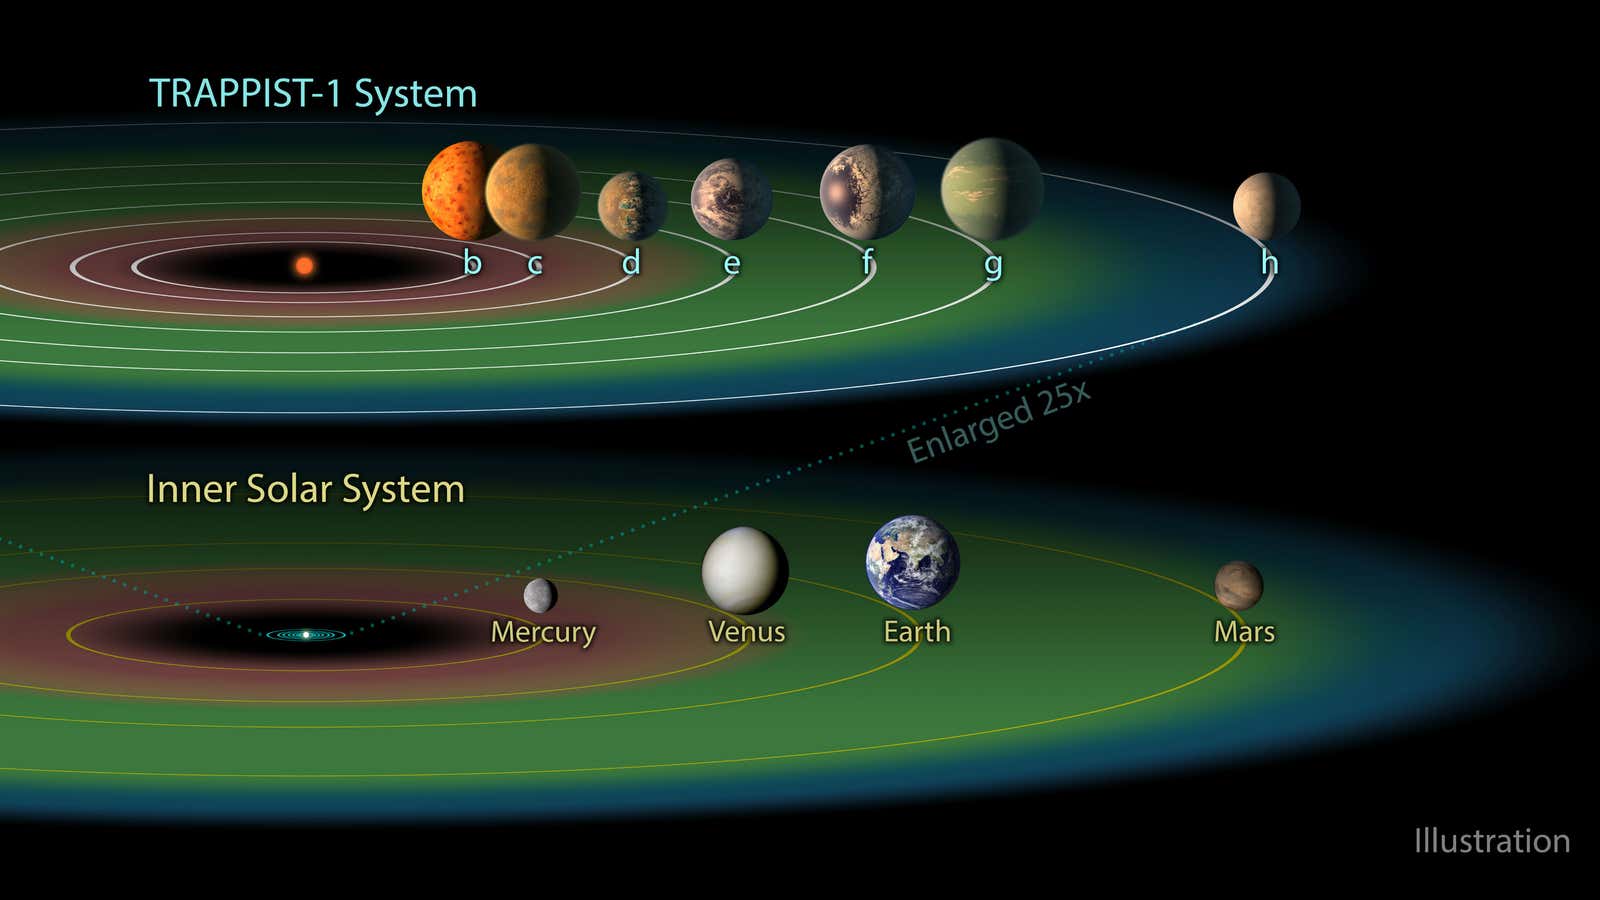 Earth-like planets in the Trappist-1 solar system may be exchanging life through meteorites